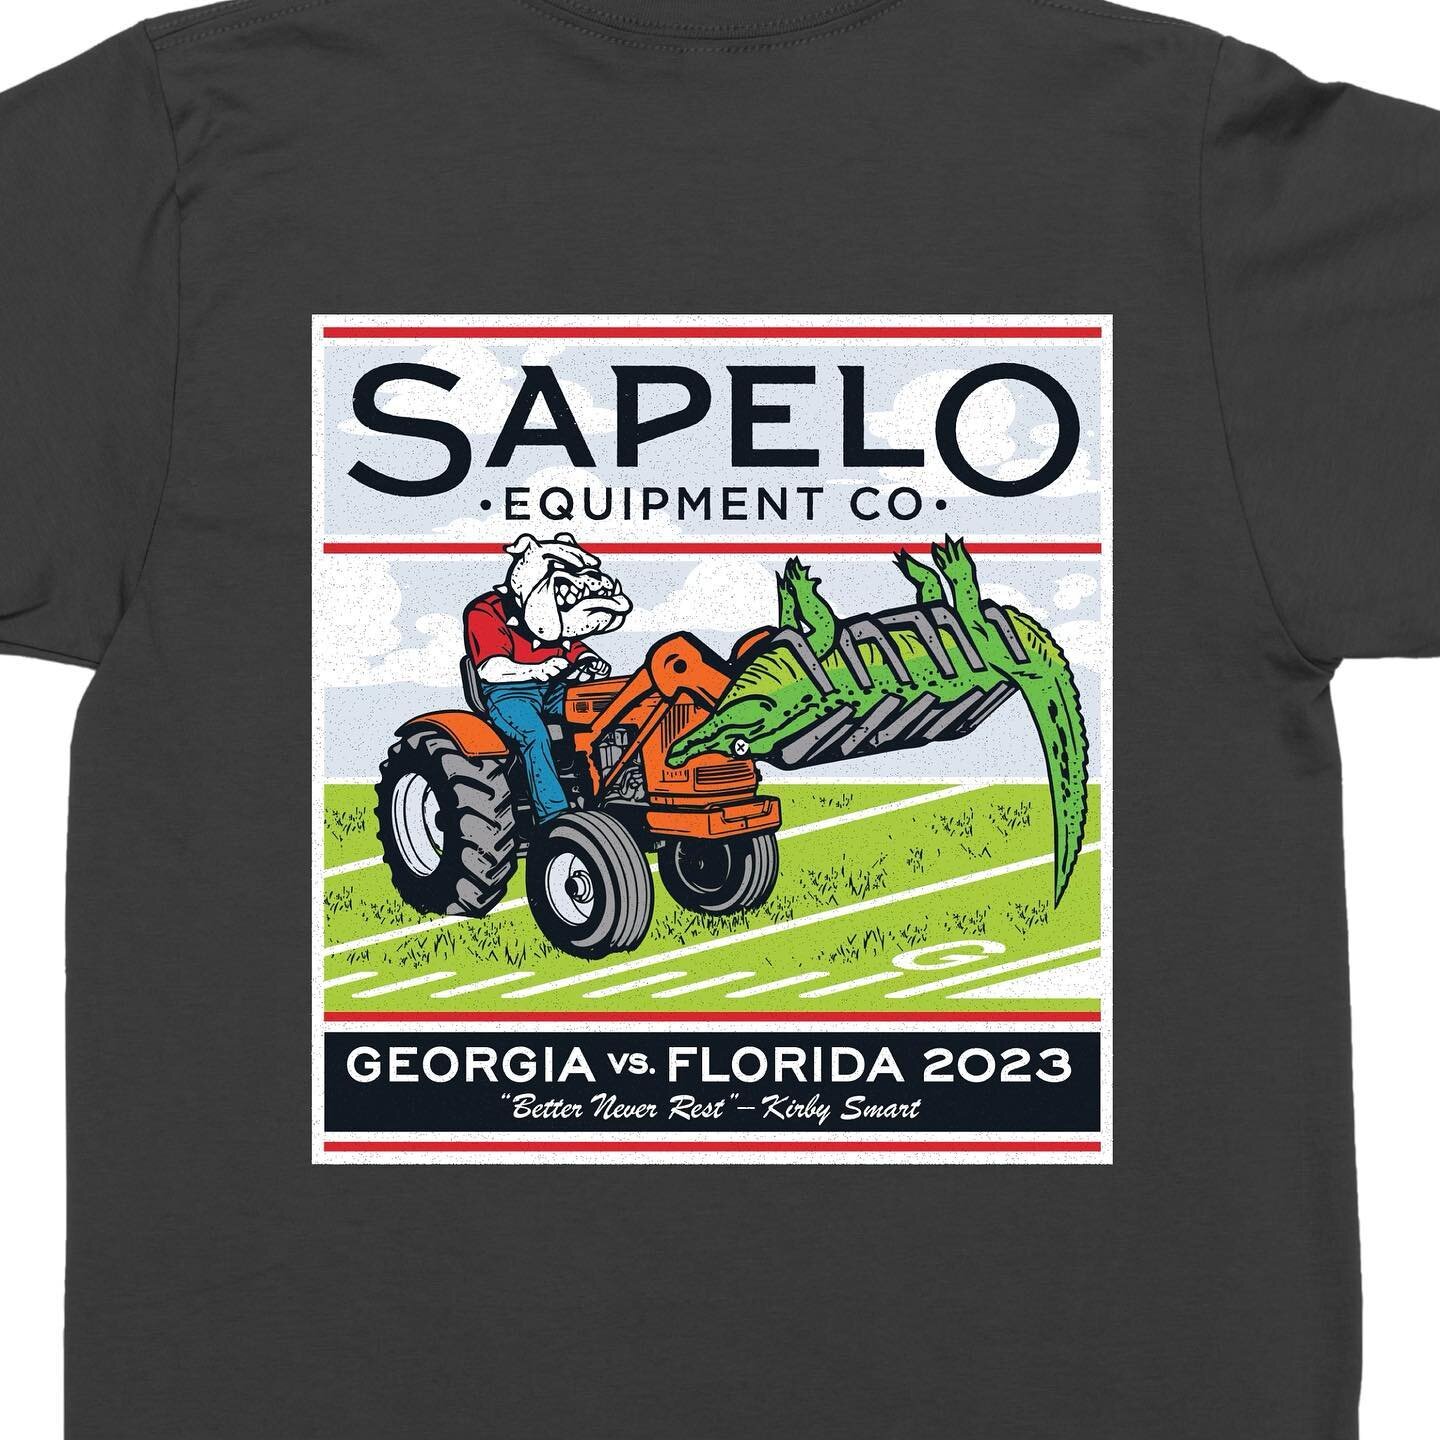 Very proud of our friends at  @sapeloequipmentco for concepting this idea, and allowing @gavinsellerscreative and I to lend our creative talents and be a part of this campaign. Sapelo Georgia vs. Florida t-shirts are here! All sale profits will go di